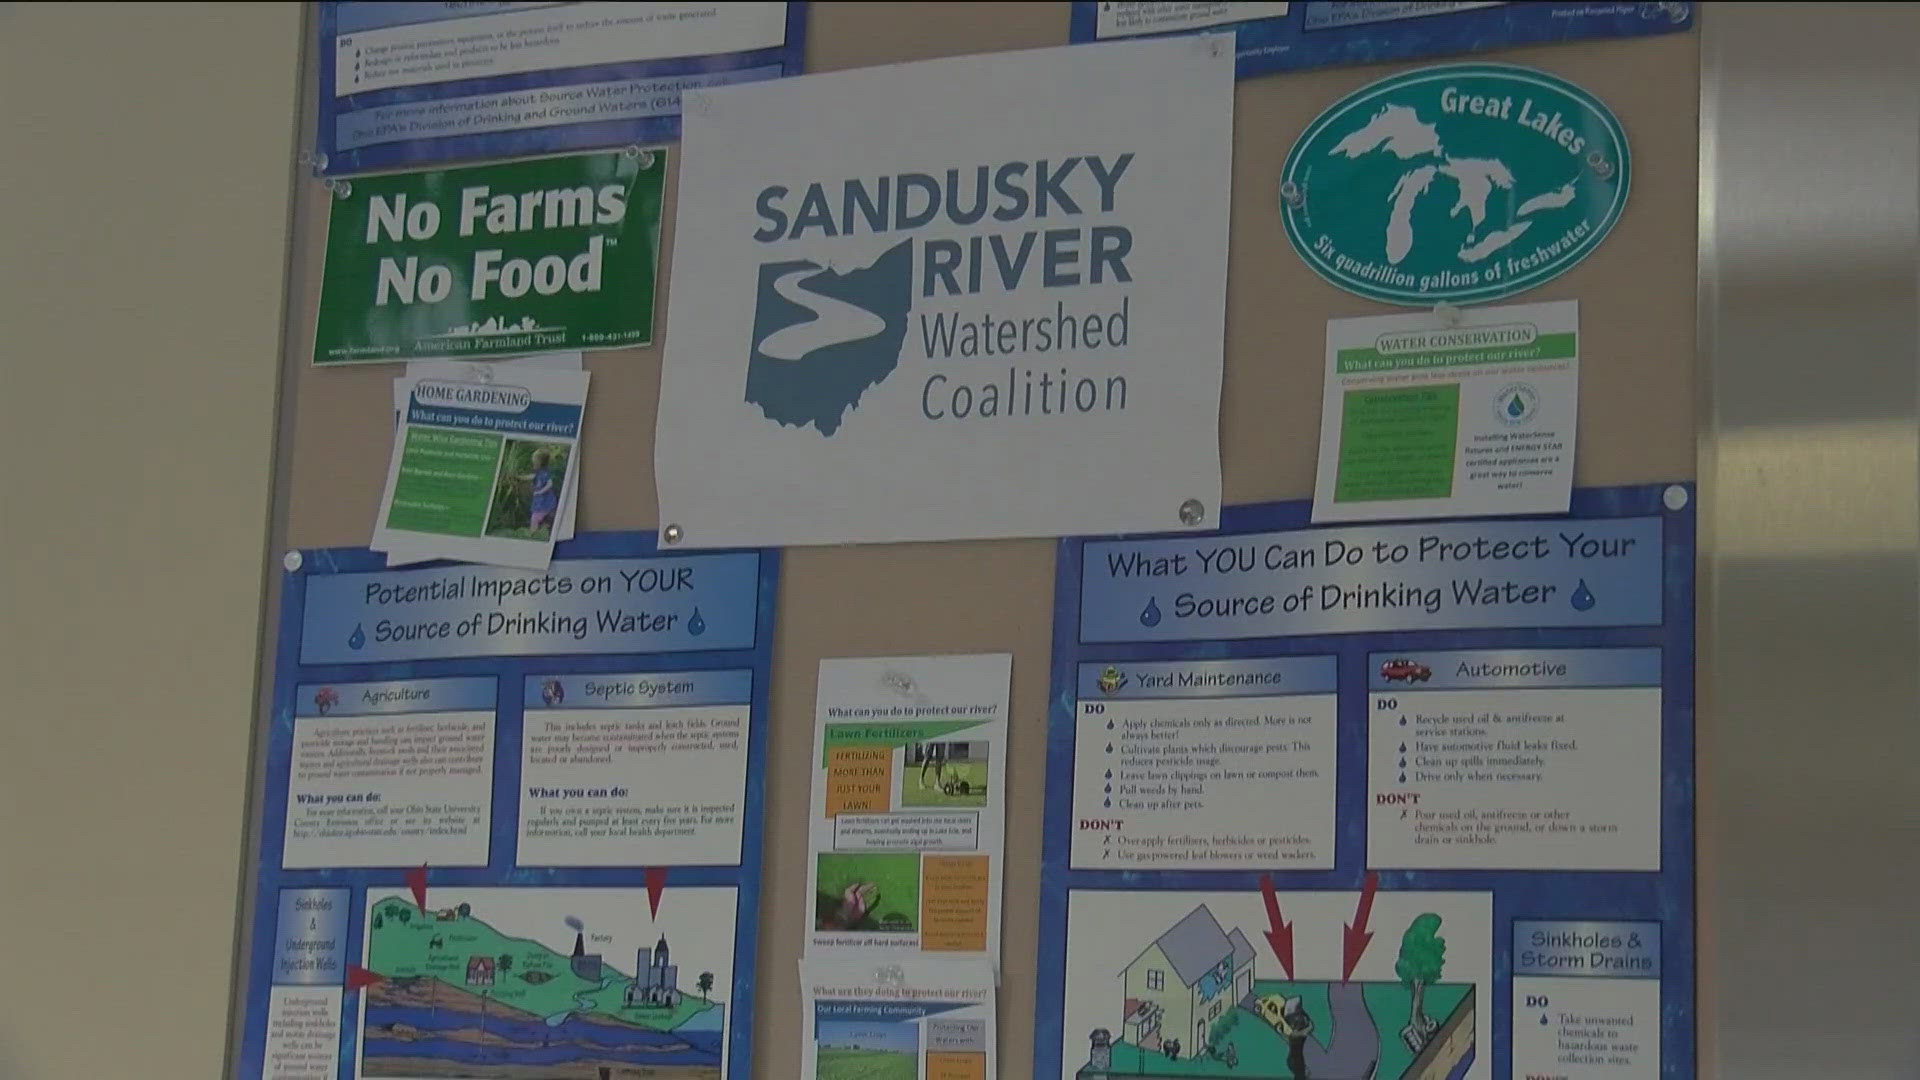 Located in Tiffin, the National Center for Water Quality Research and the Sandusky River Watershed Coalition tests water samples for the health of rivers and streams